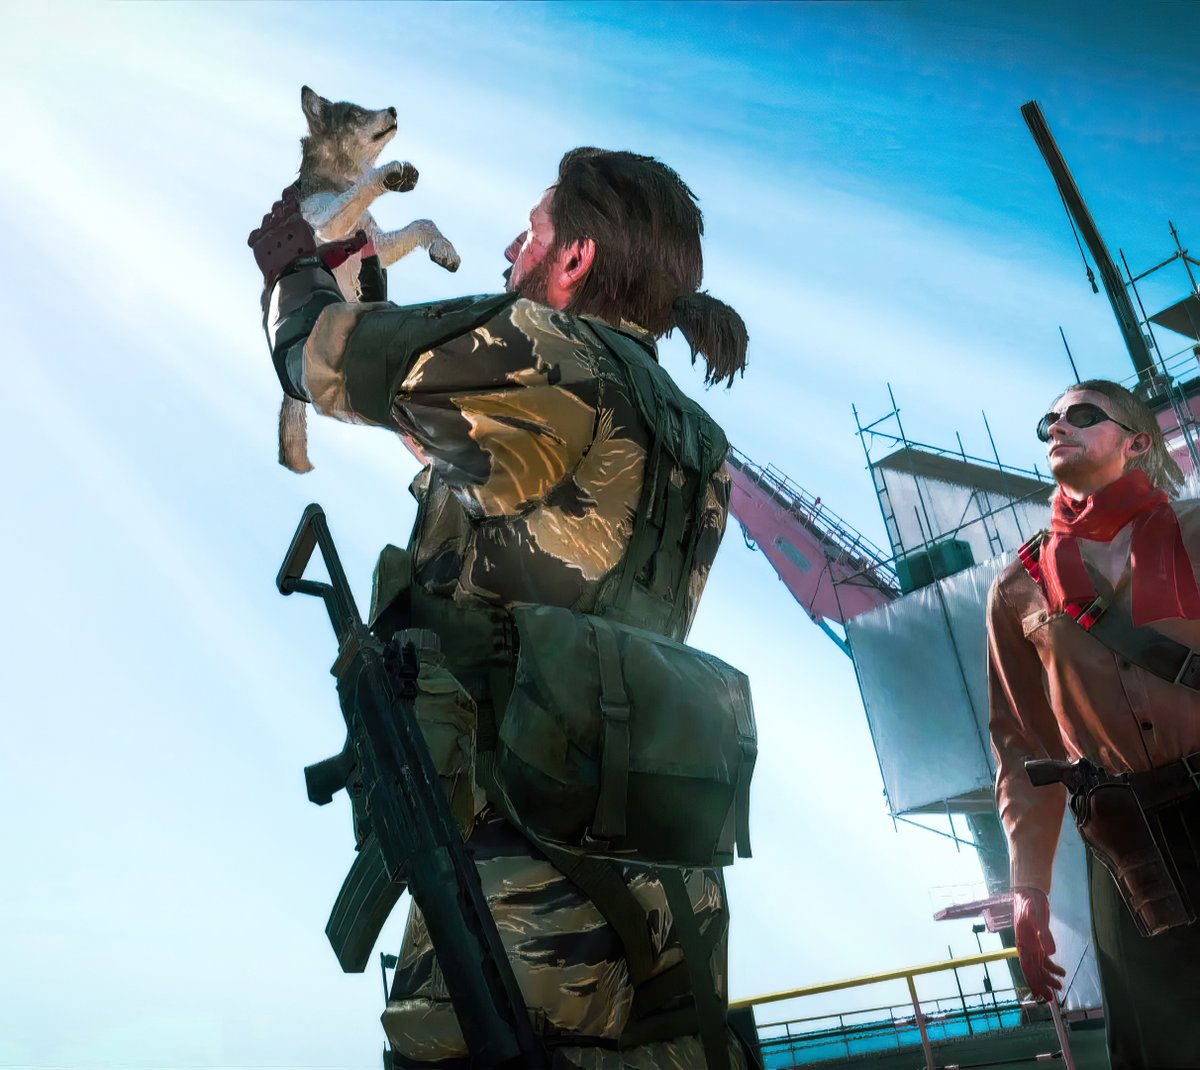 🐶🏠 “There is nothing more important than a good, safe, secure home.”

— Rosalynn Carter.

#MGSV #MetalGearSolidV #MetalGearSolid5 #ThePhantomPain #VirtualPhotography